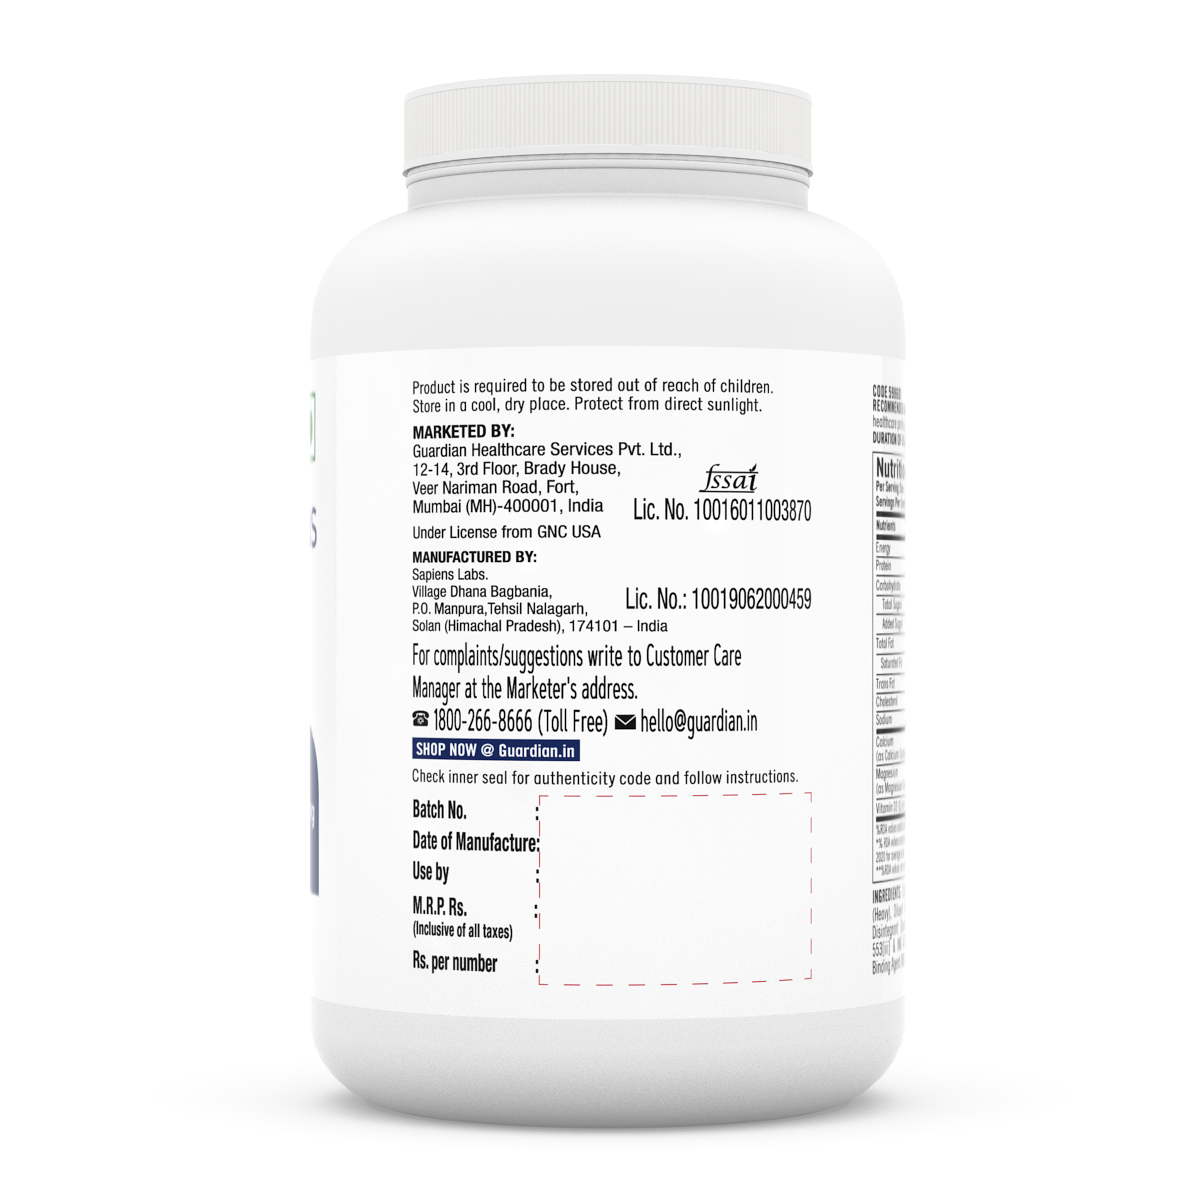 GNC Calcium Plus 1000mg with Magnesium and Vitamin D3 - Promotes Healthy & Strong Bones